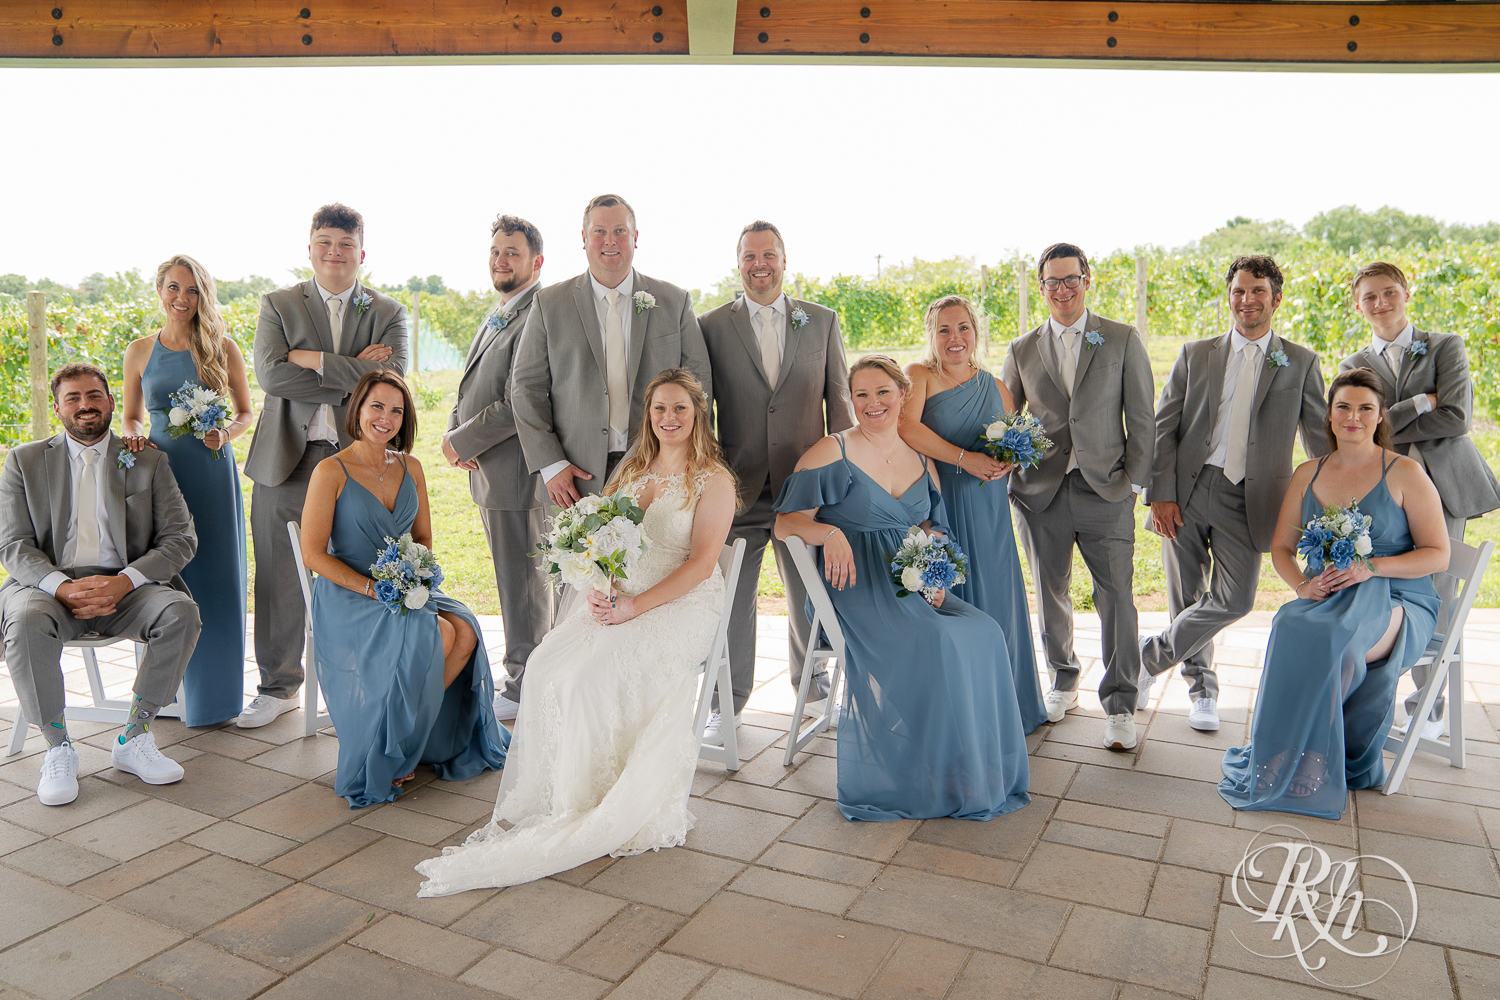 Wedding party in grey suits and blue dresses smiling at 7 Vines Vineyard in Dellwood, Minnesota.